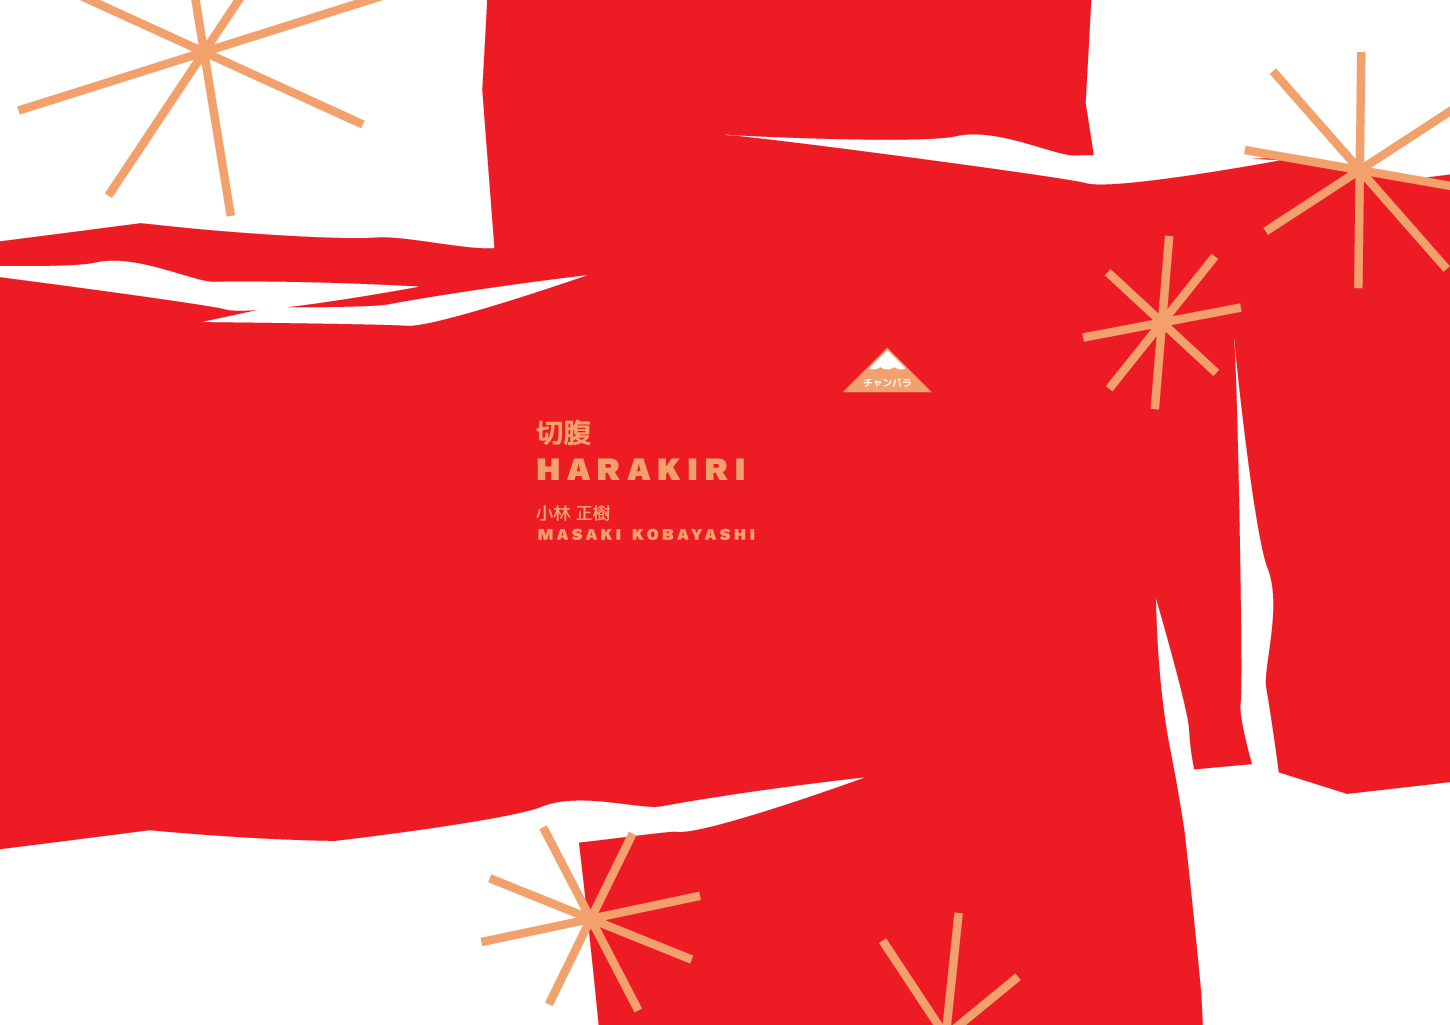 Graphic design of a DVD packaging for Harakiri movie